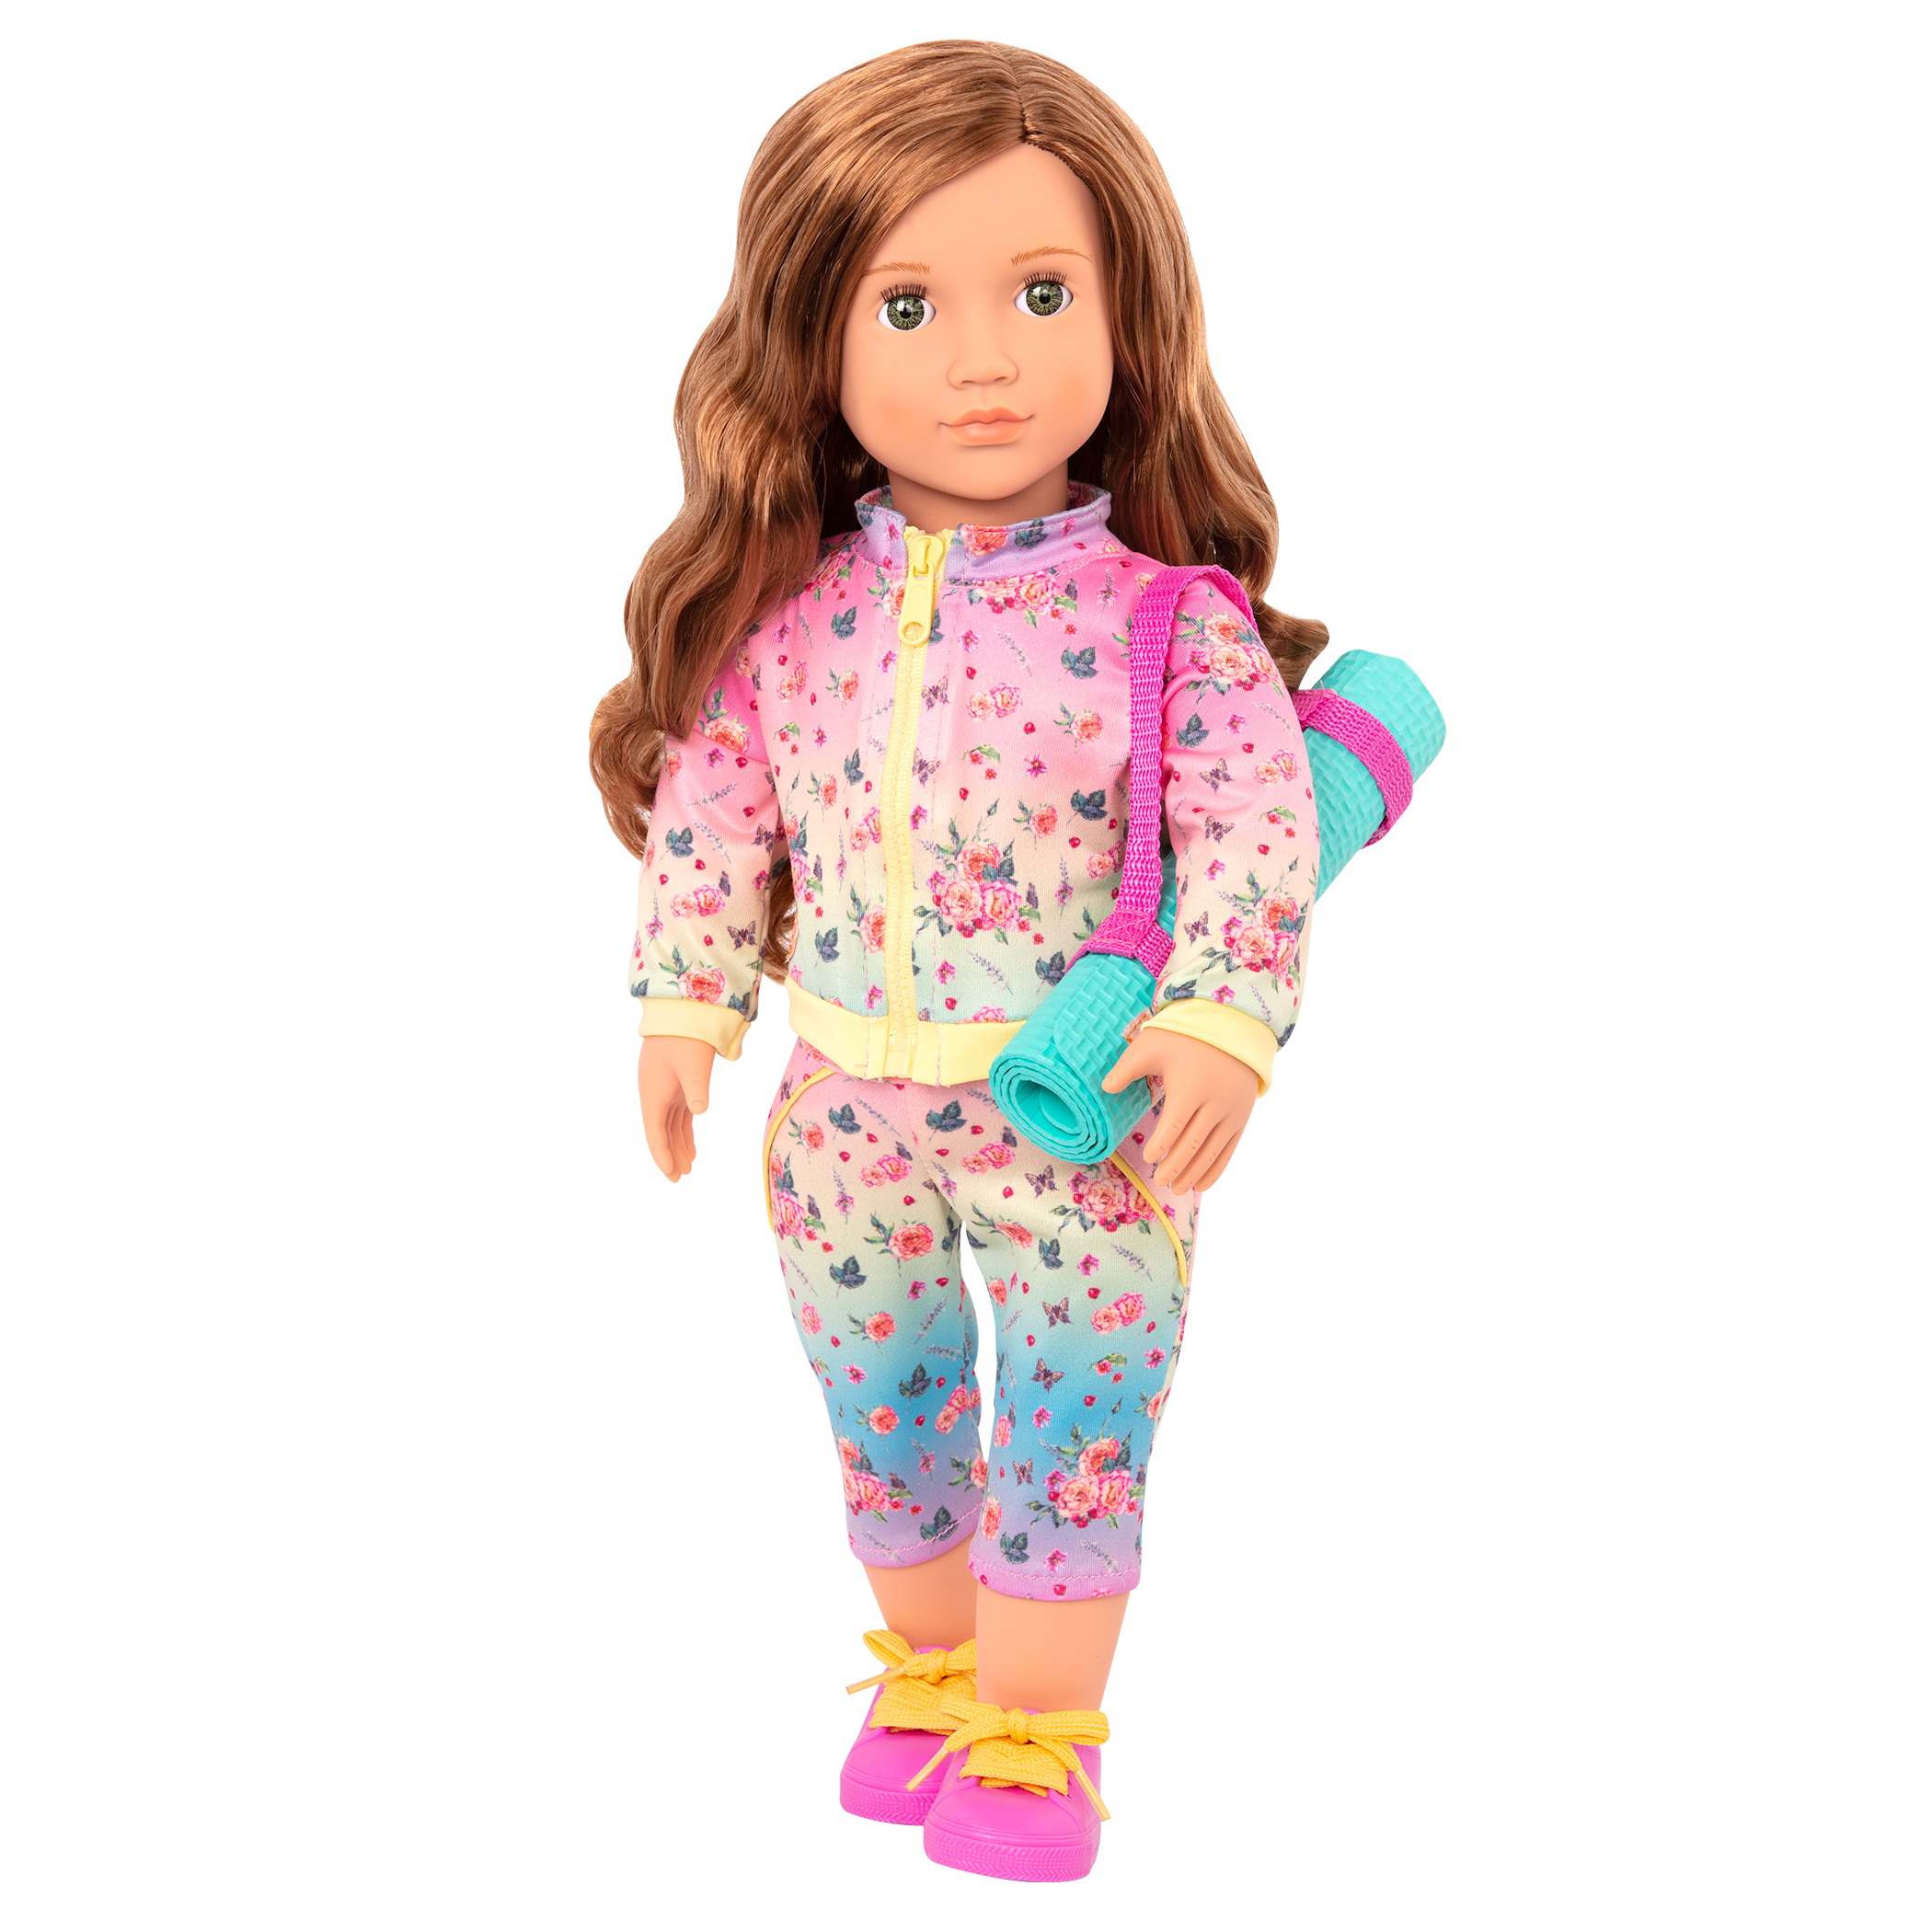 18-inch doll with medium-brown hair, green eyes and yoga mat